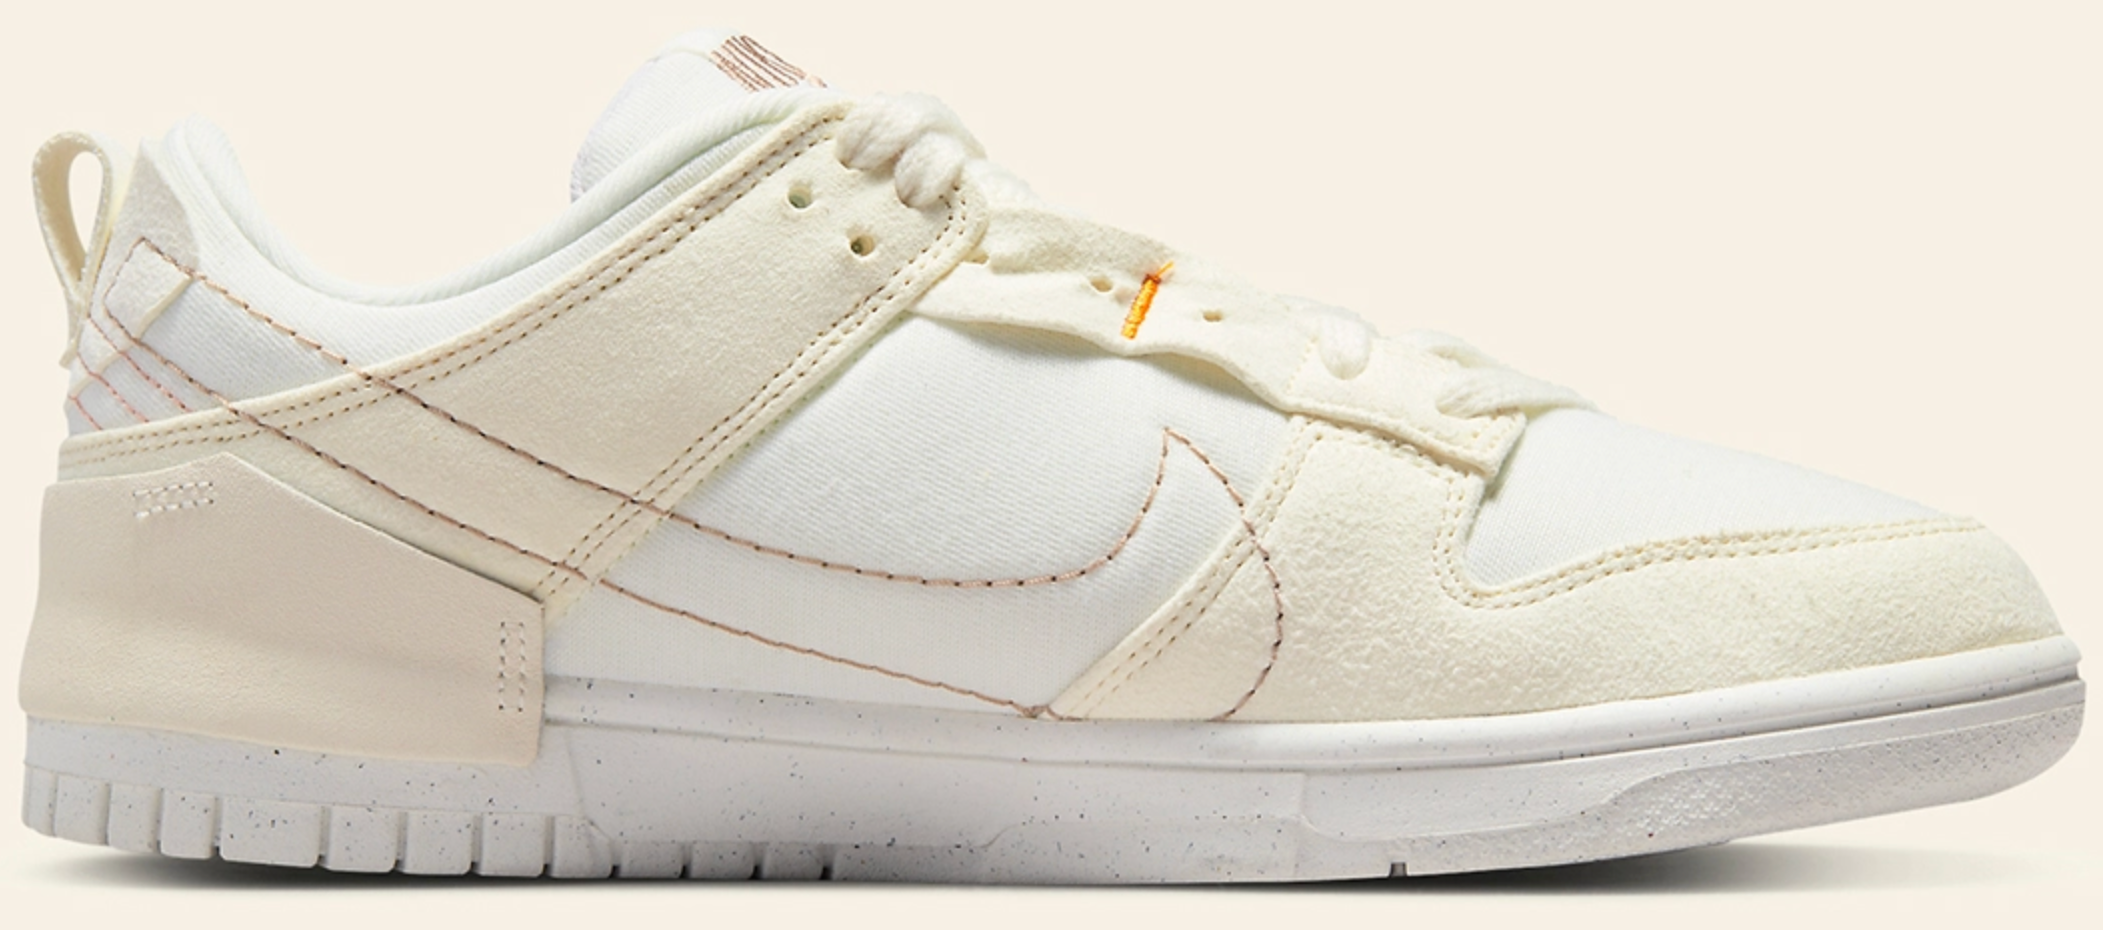 NIKE DUNK LOW DISRUPT 2 PALE IVORY - The Edit LDN